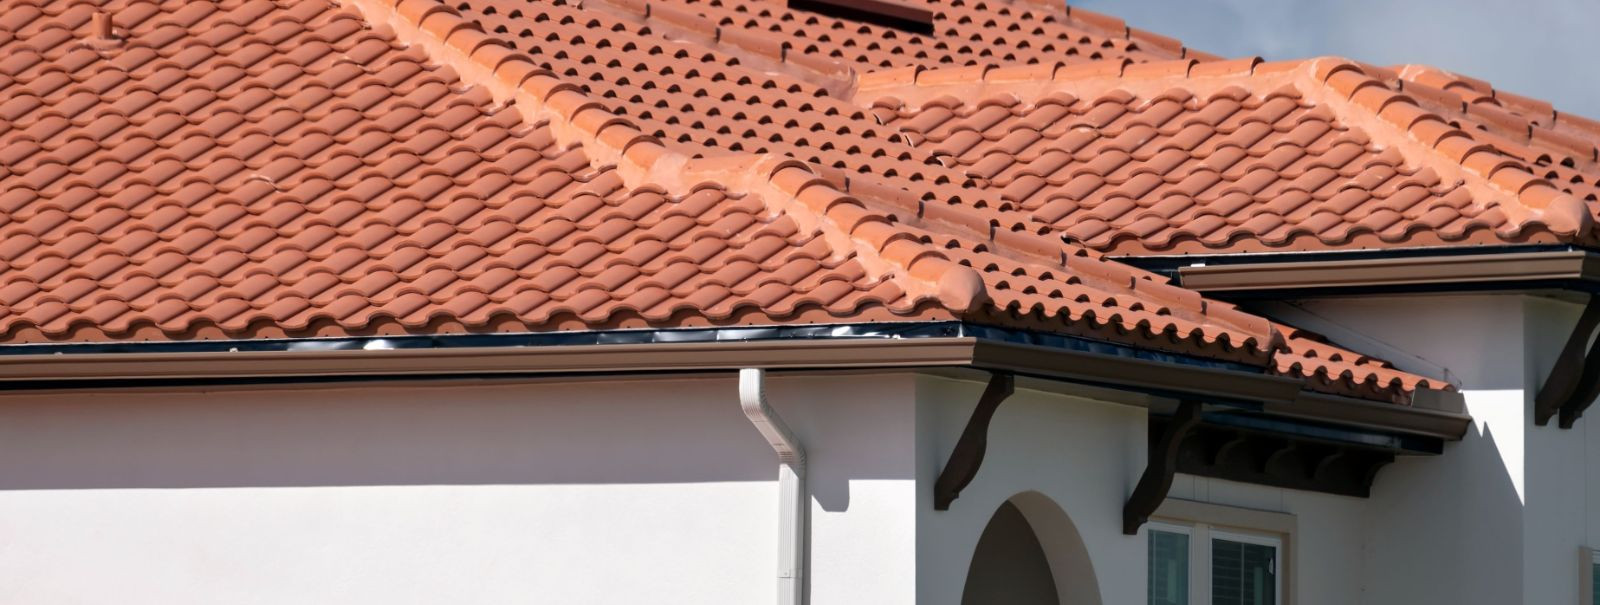 Choosing the right roofing material is crucial for the safety, durability, and aesthetics of your home. The roof is your first line of defense against the eleme